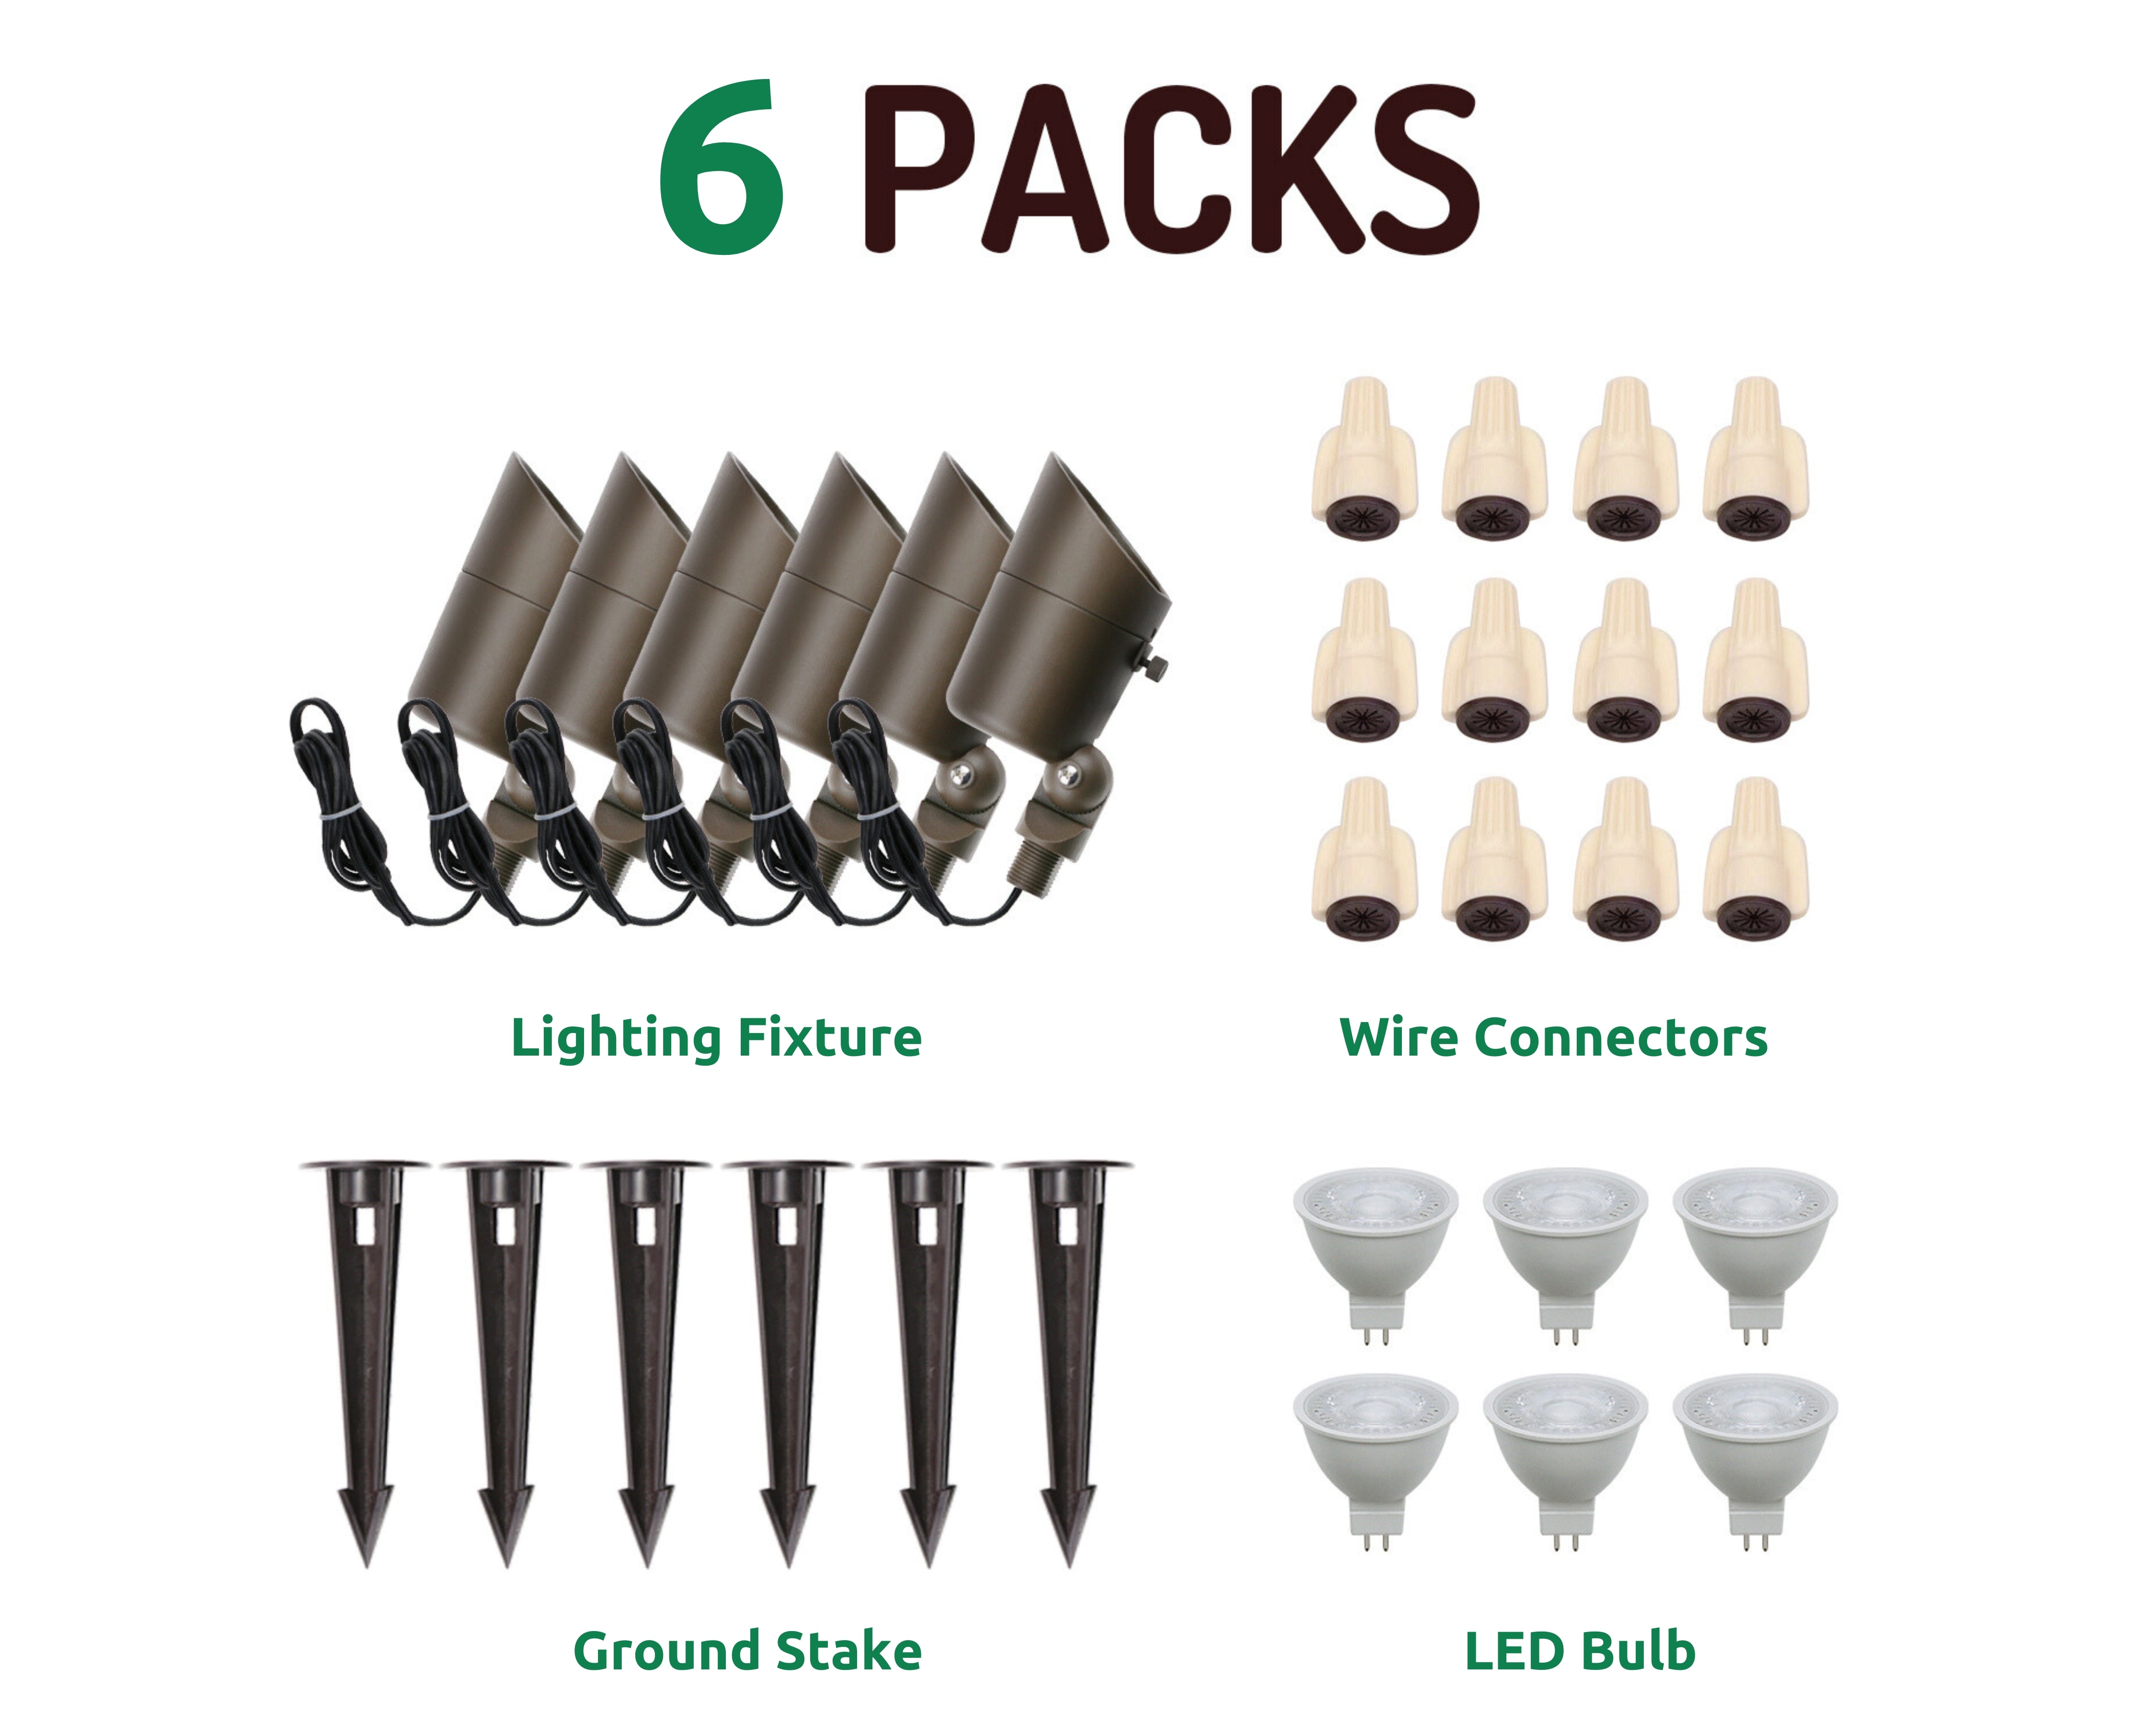 Lumina Lighting® 5W Low Voltage LED Spotlight | 12V Replaceable LED Bulb Included (Bronze, 6-Pack)